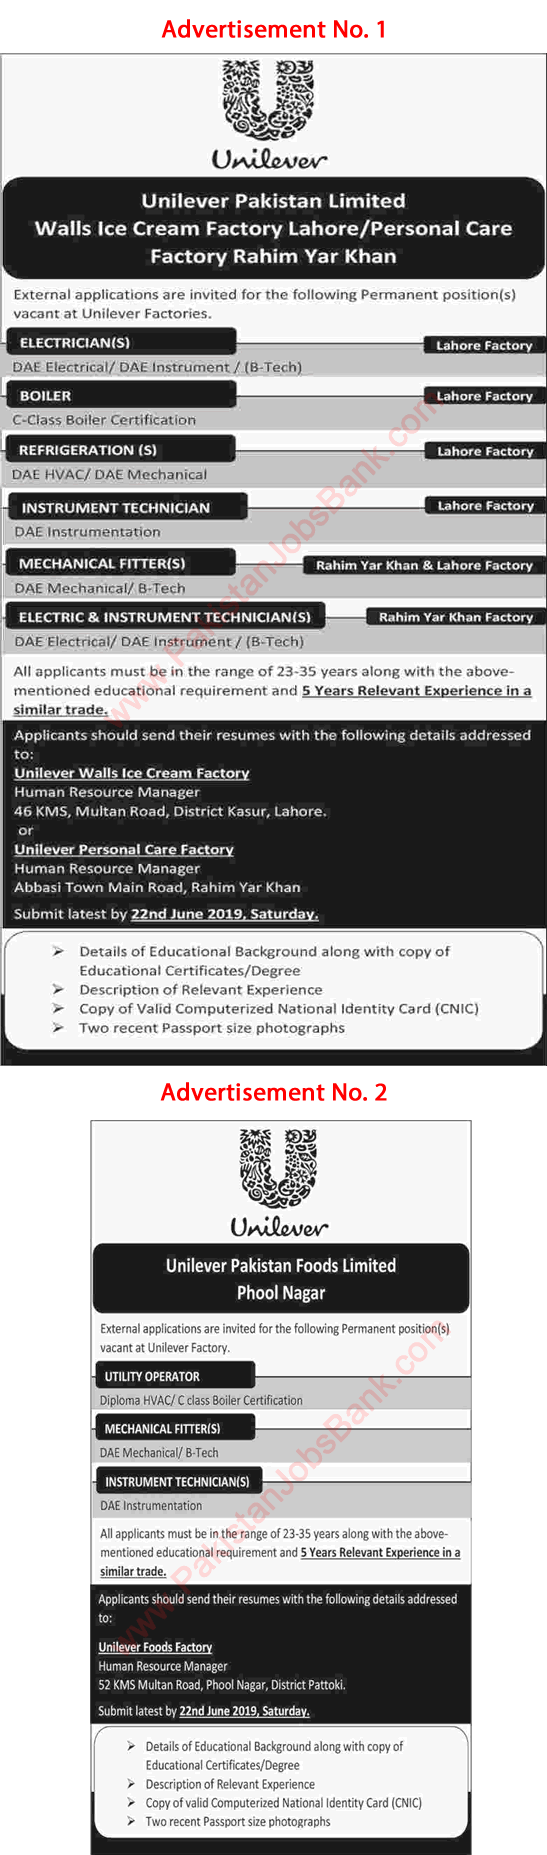 Unilever Pakistan Jobs 2019 June Electricians, Mechanical Fitters & Others Latest